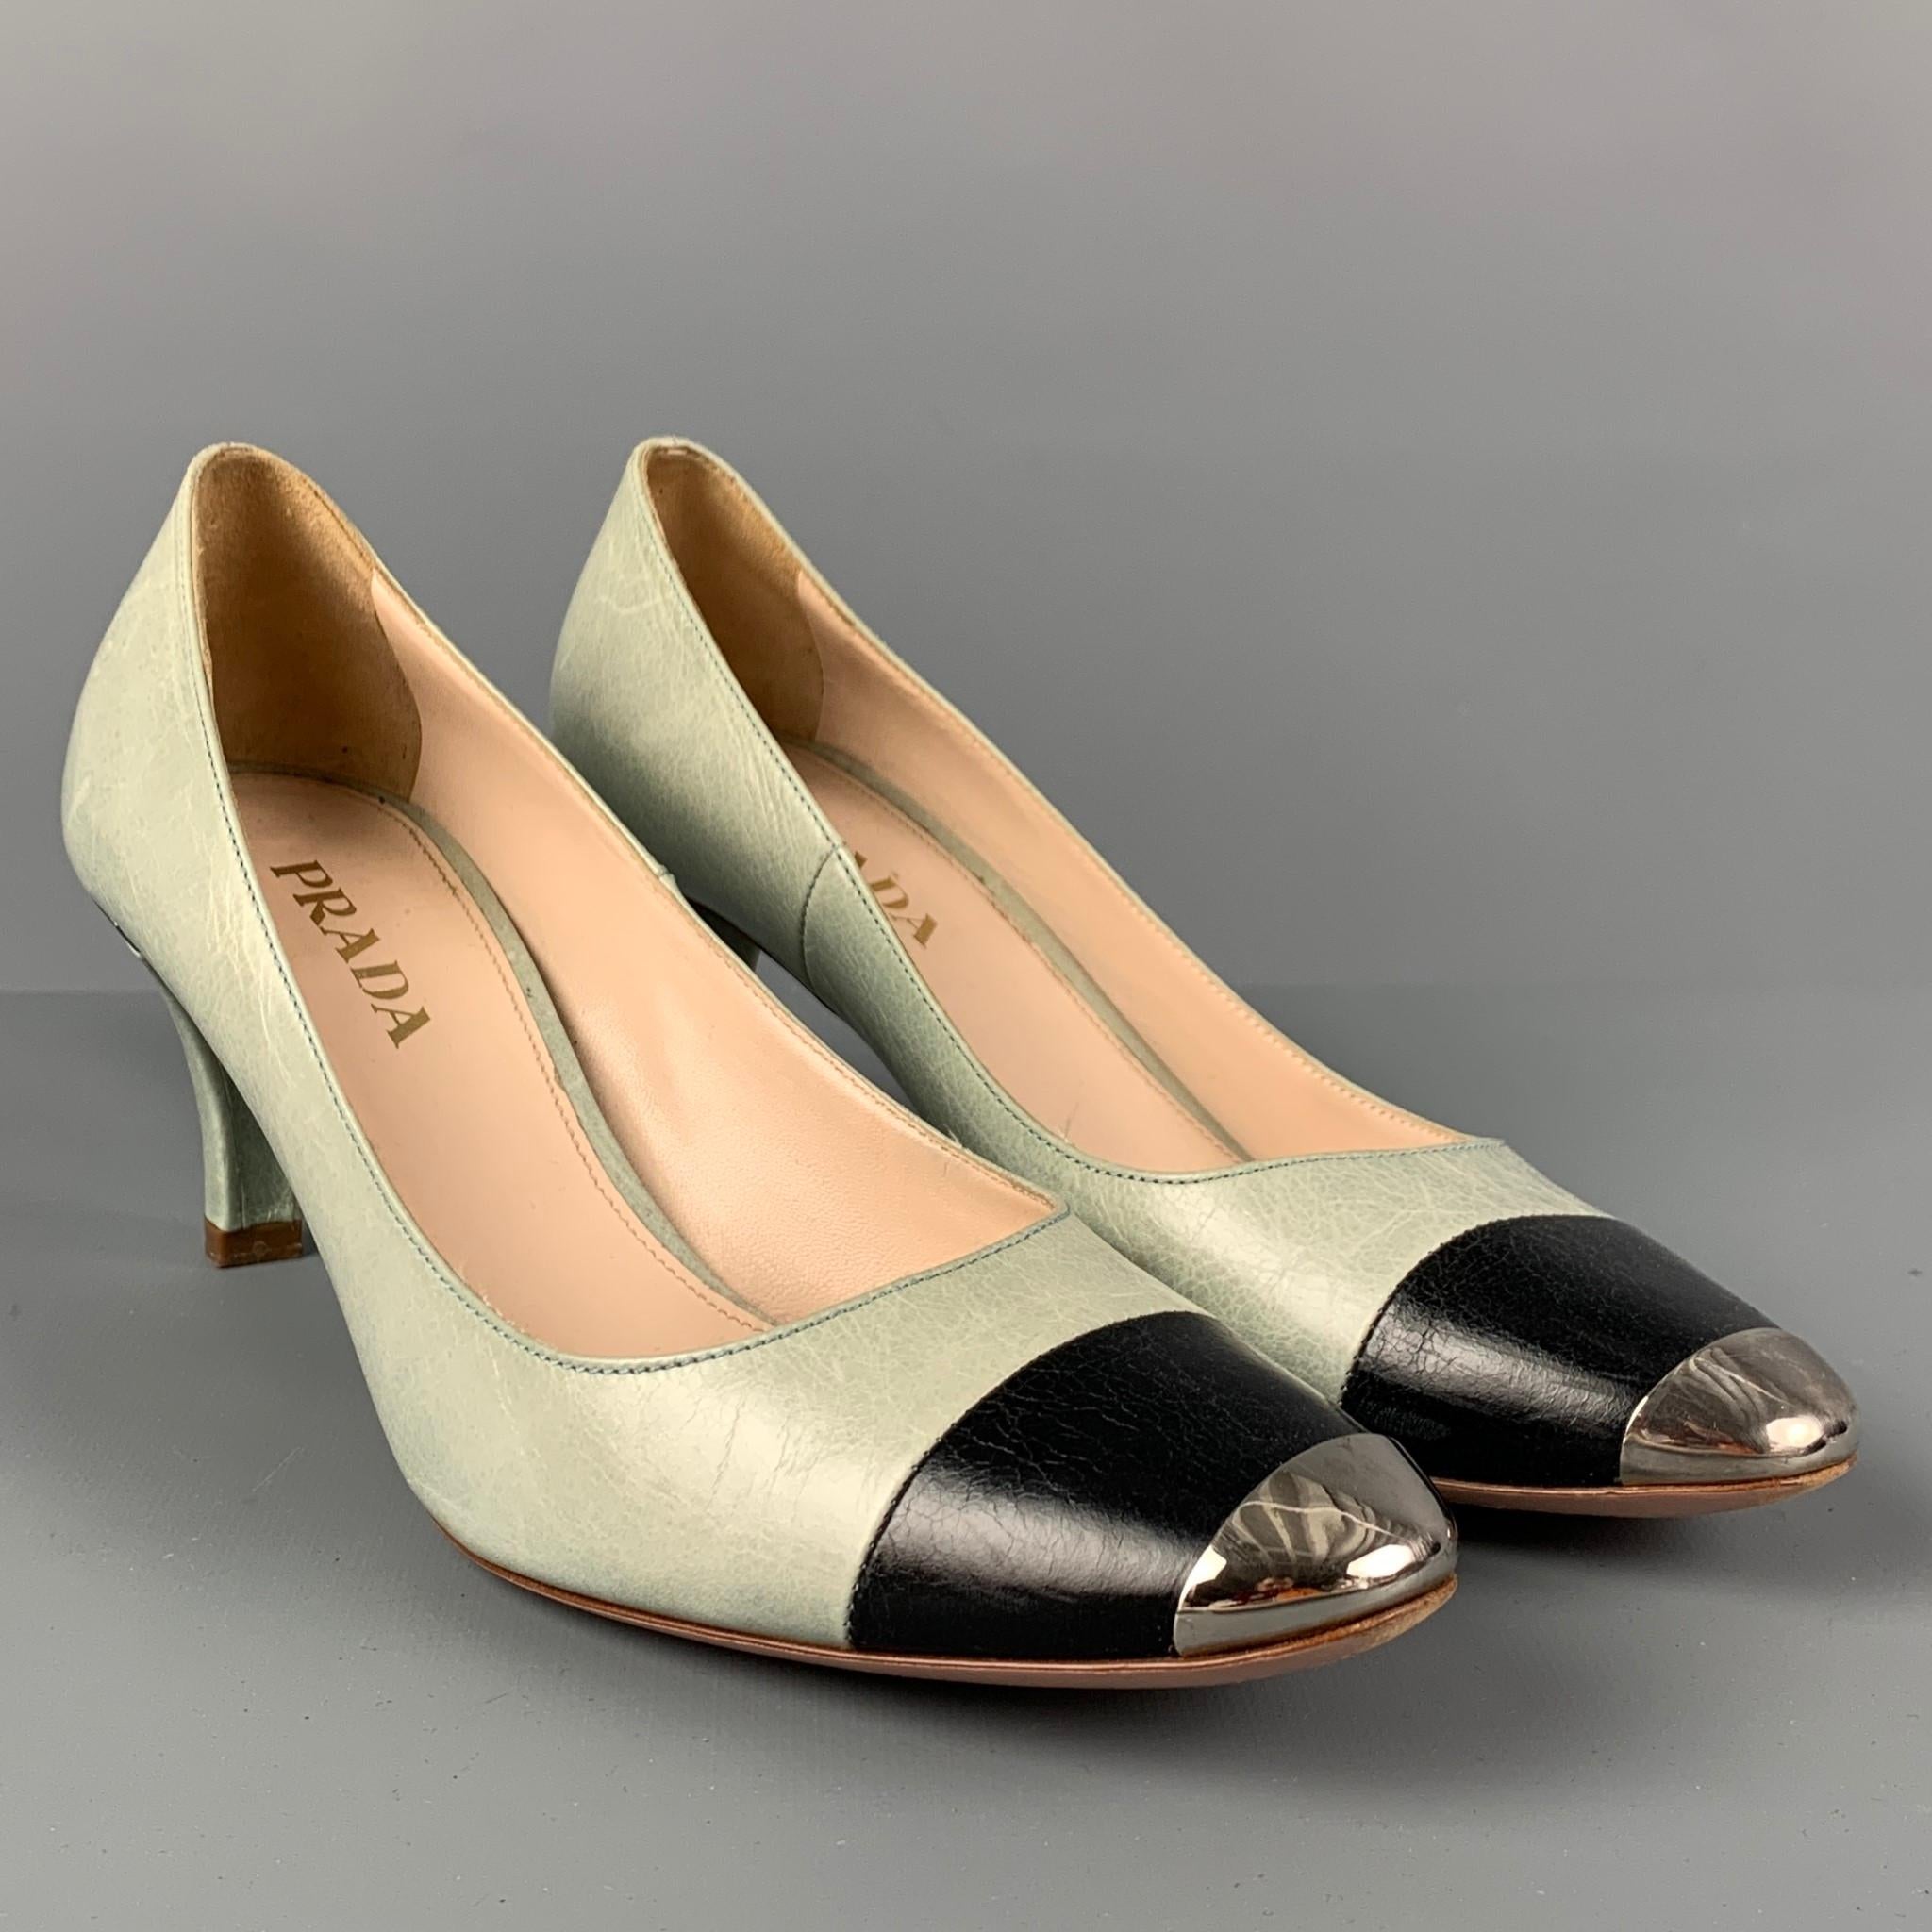 PRADA pumps comes in a mint leather featuring a black cap toe, silver tone detail, and a kitten heel. Made in Italy.

Very Good Pre-Owned Condition.
Marked: 37

Measurements:

Heel: 2.5 in.
 